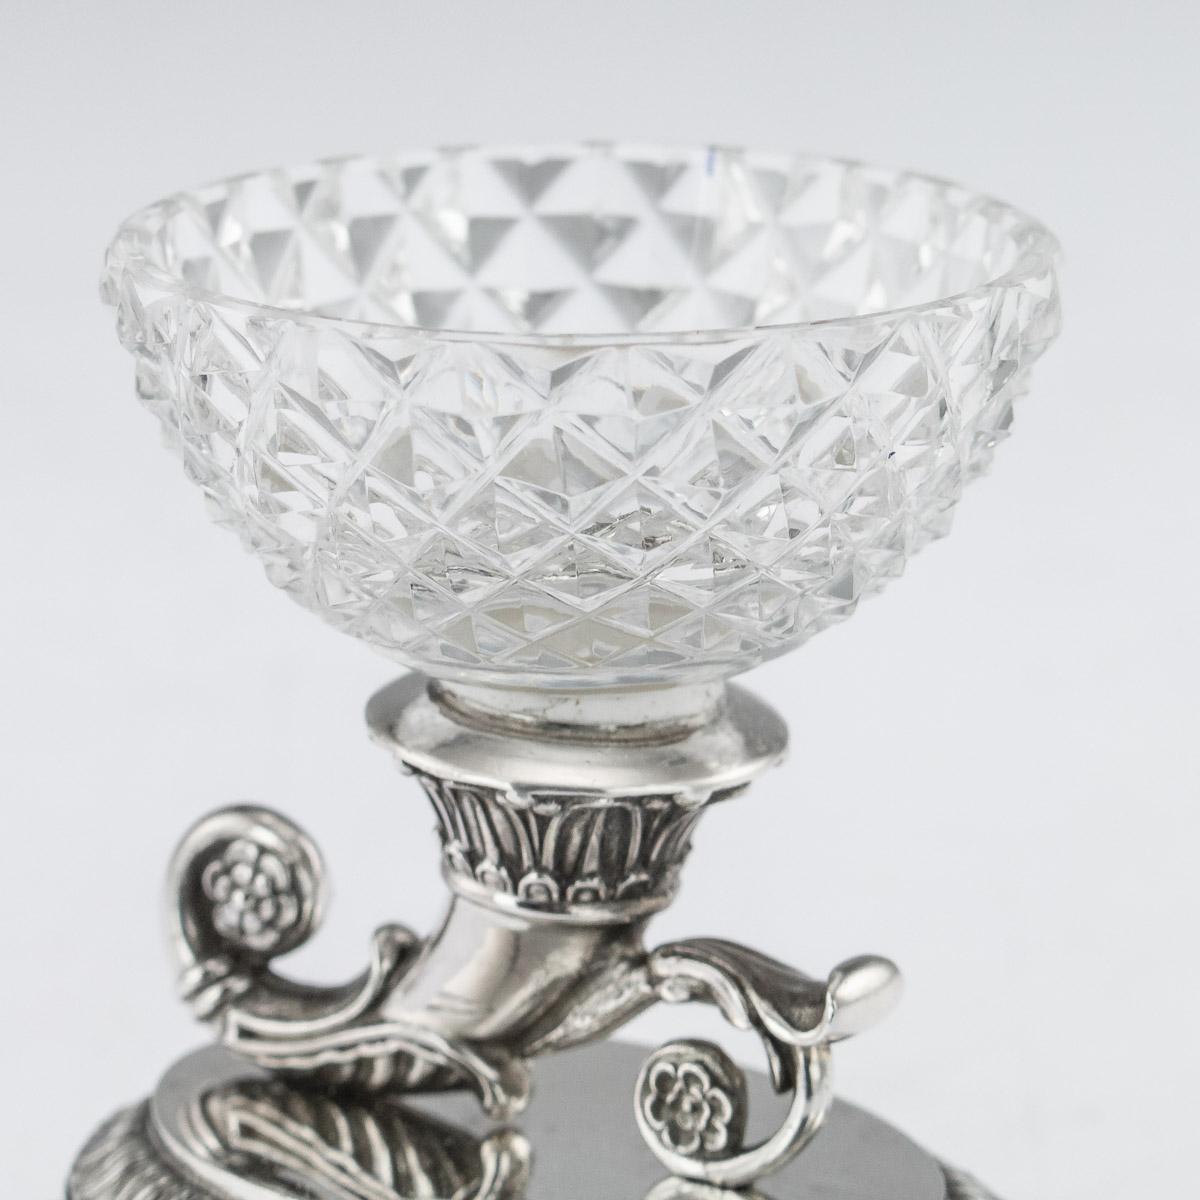 19th Century French Solid Silver & Glass Condiments Service, Paris, c.1830 11